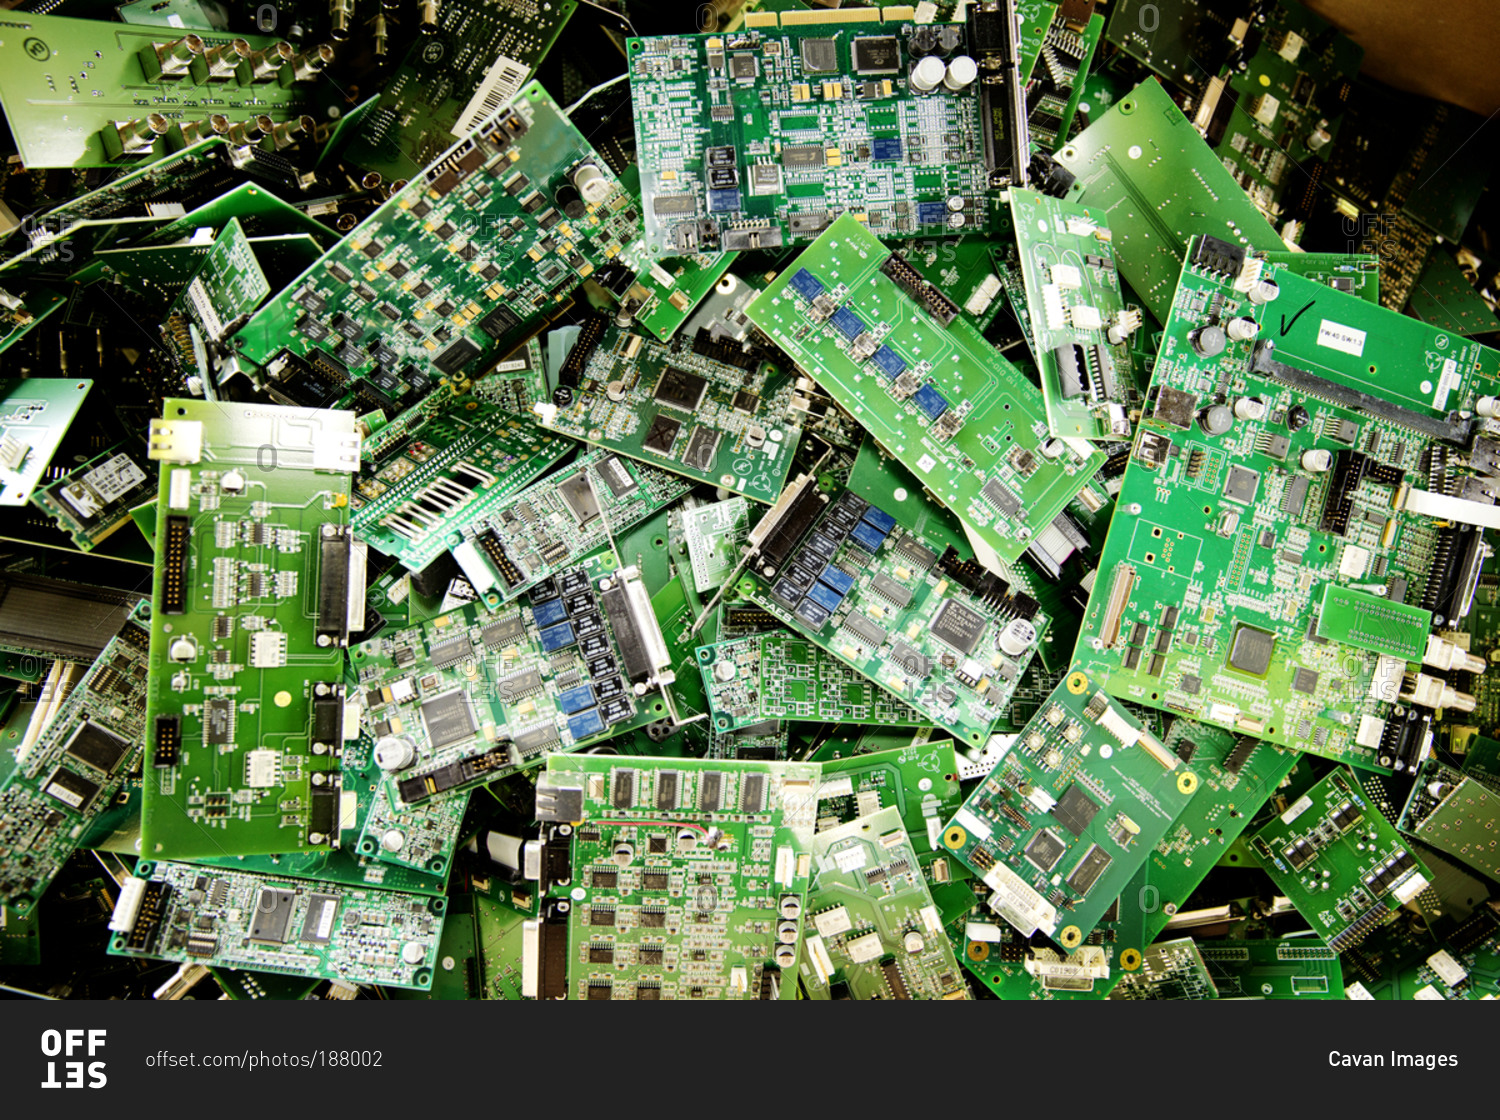 A pile of computer circuit boards prepared to be recycled